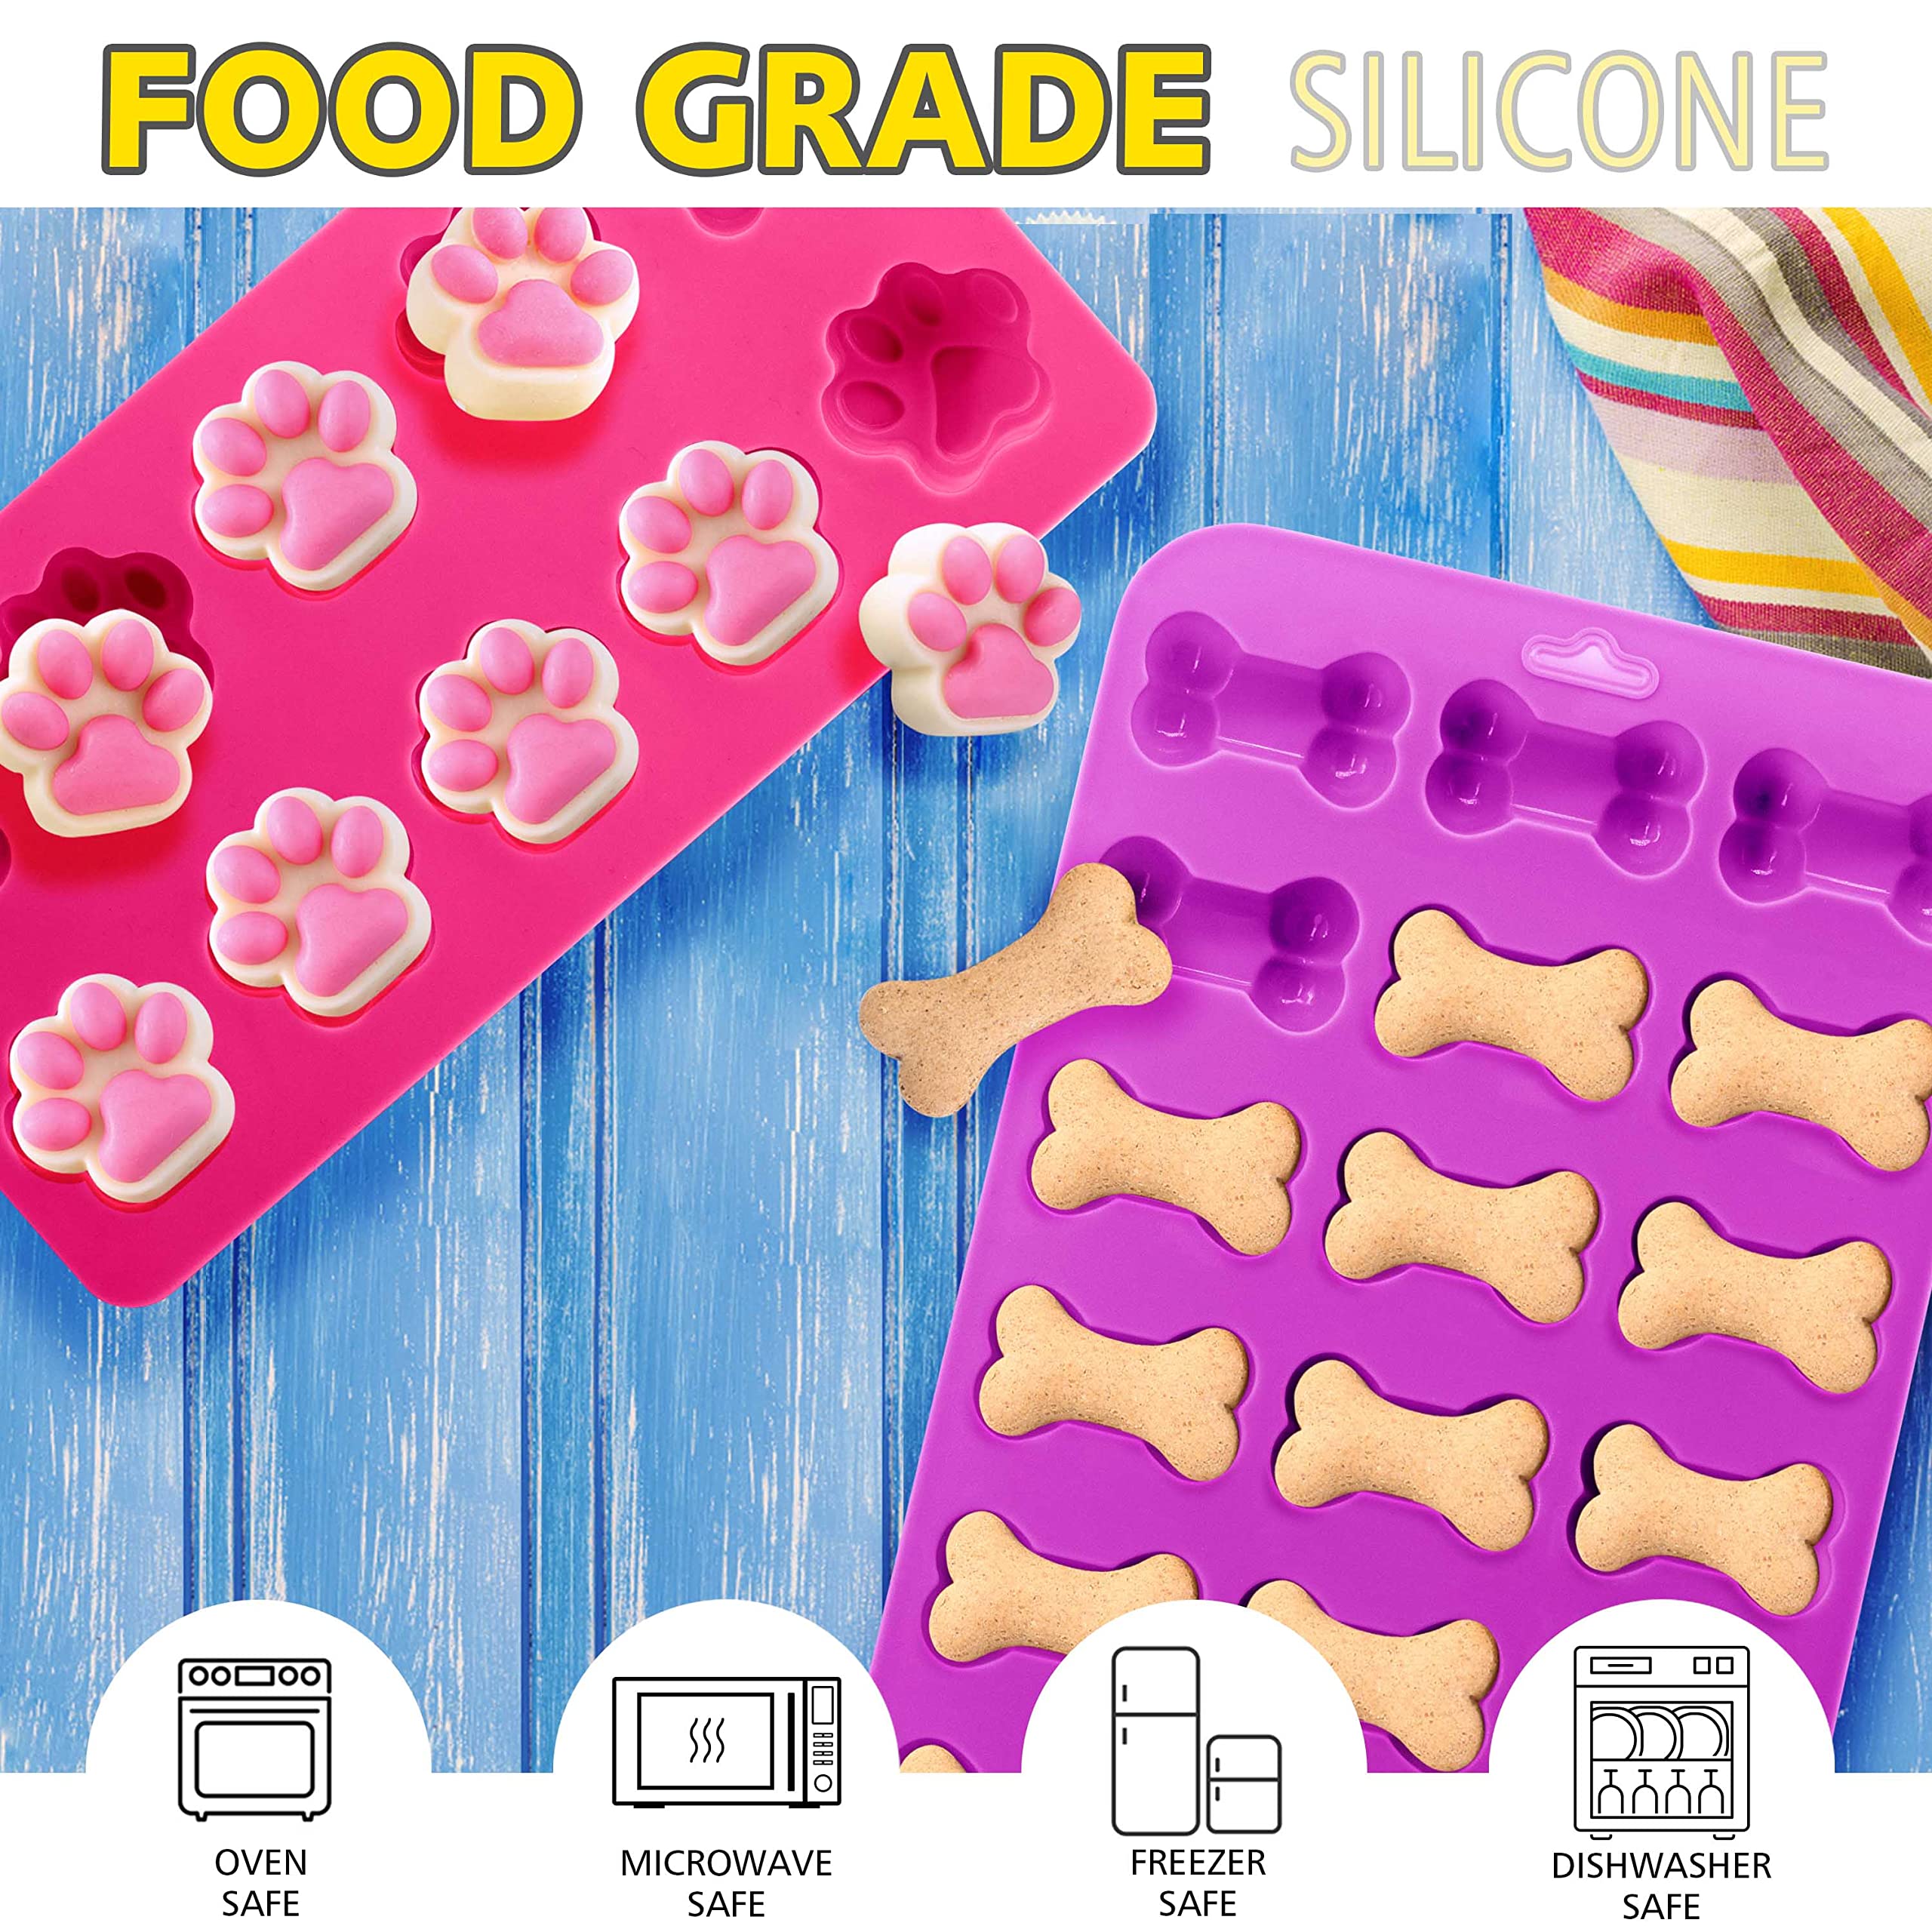 Anaeat Reusable Silicone Molds with Puppy Dog Paw and Bone Shaped, Flexible & Non-Stick Ice Cube Tray, Candy and Chocolate Making Mold for Homemade Baking Dog Treats, Jelly, Biscuit & Cupcake (2 Pack)